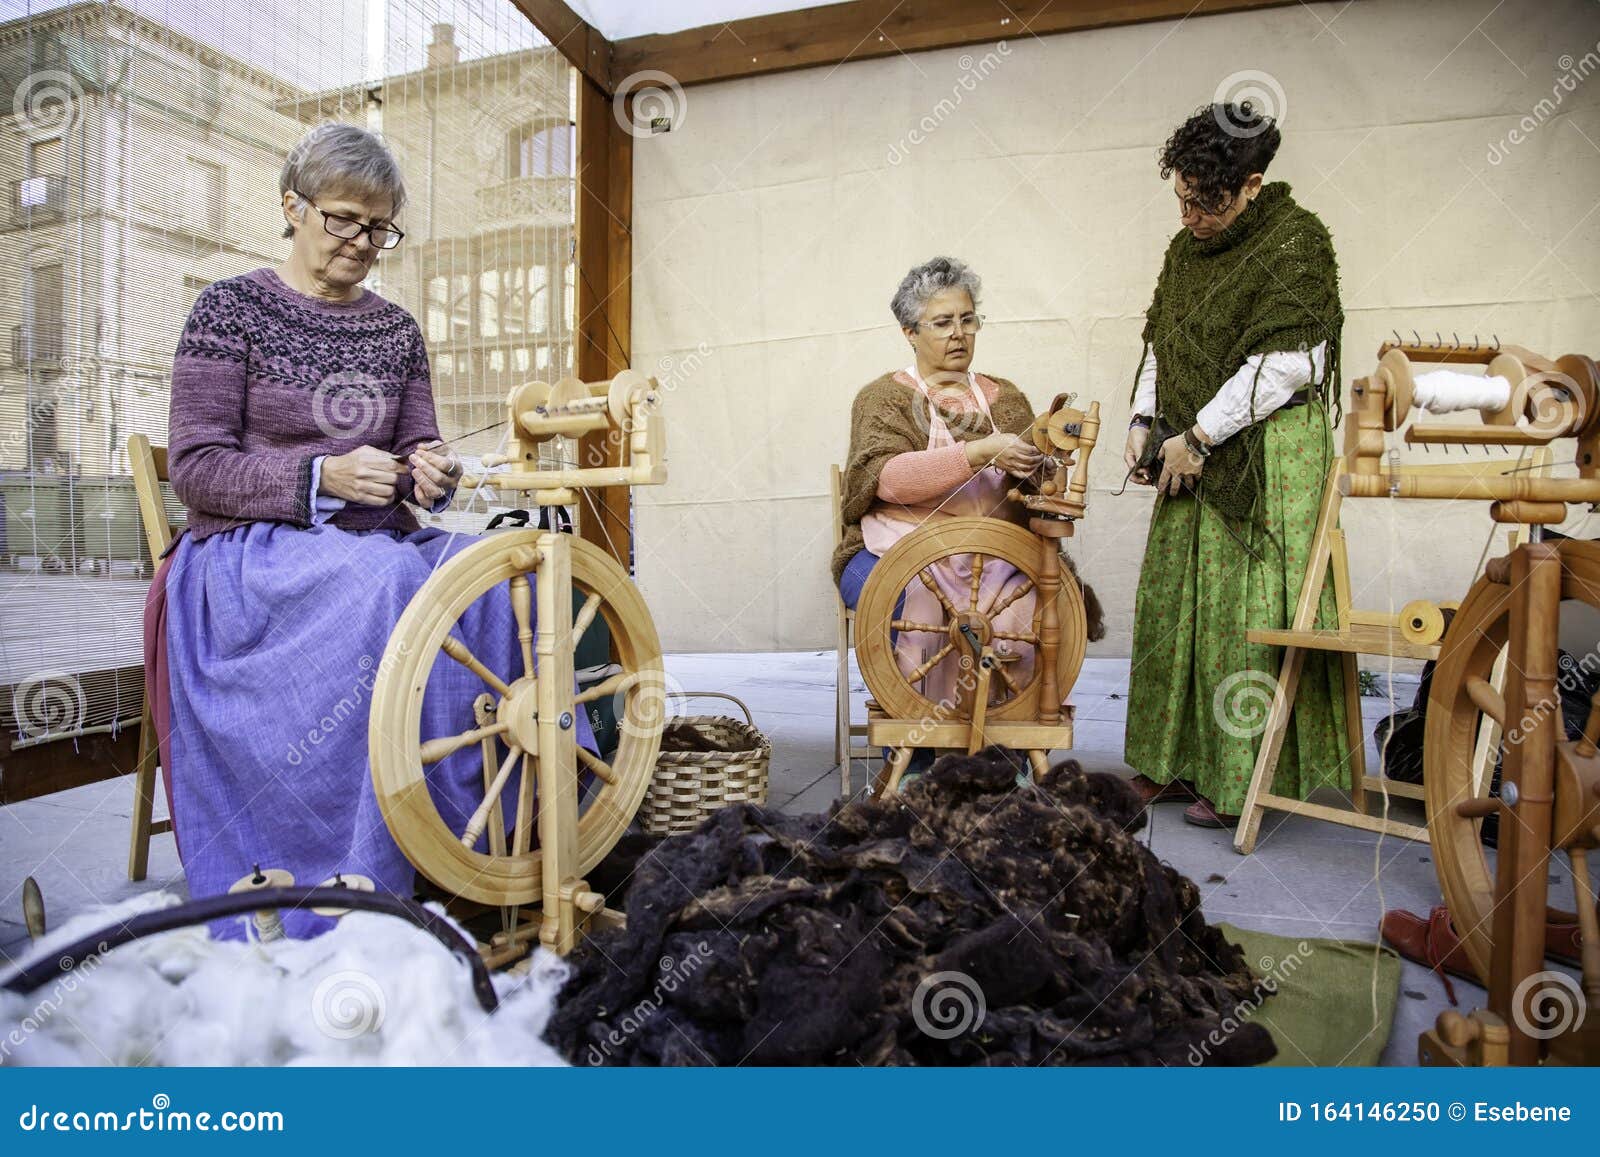 Women Spinning Thread with a Wooden Spinning Wheel Editorial Image